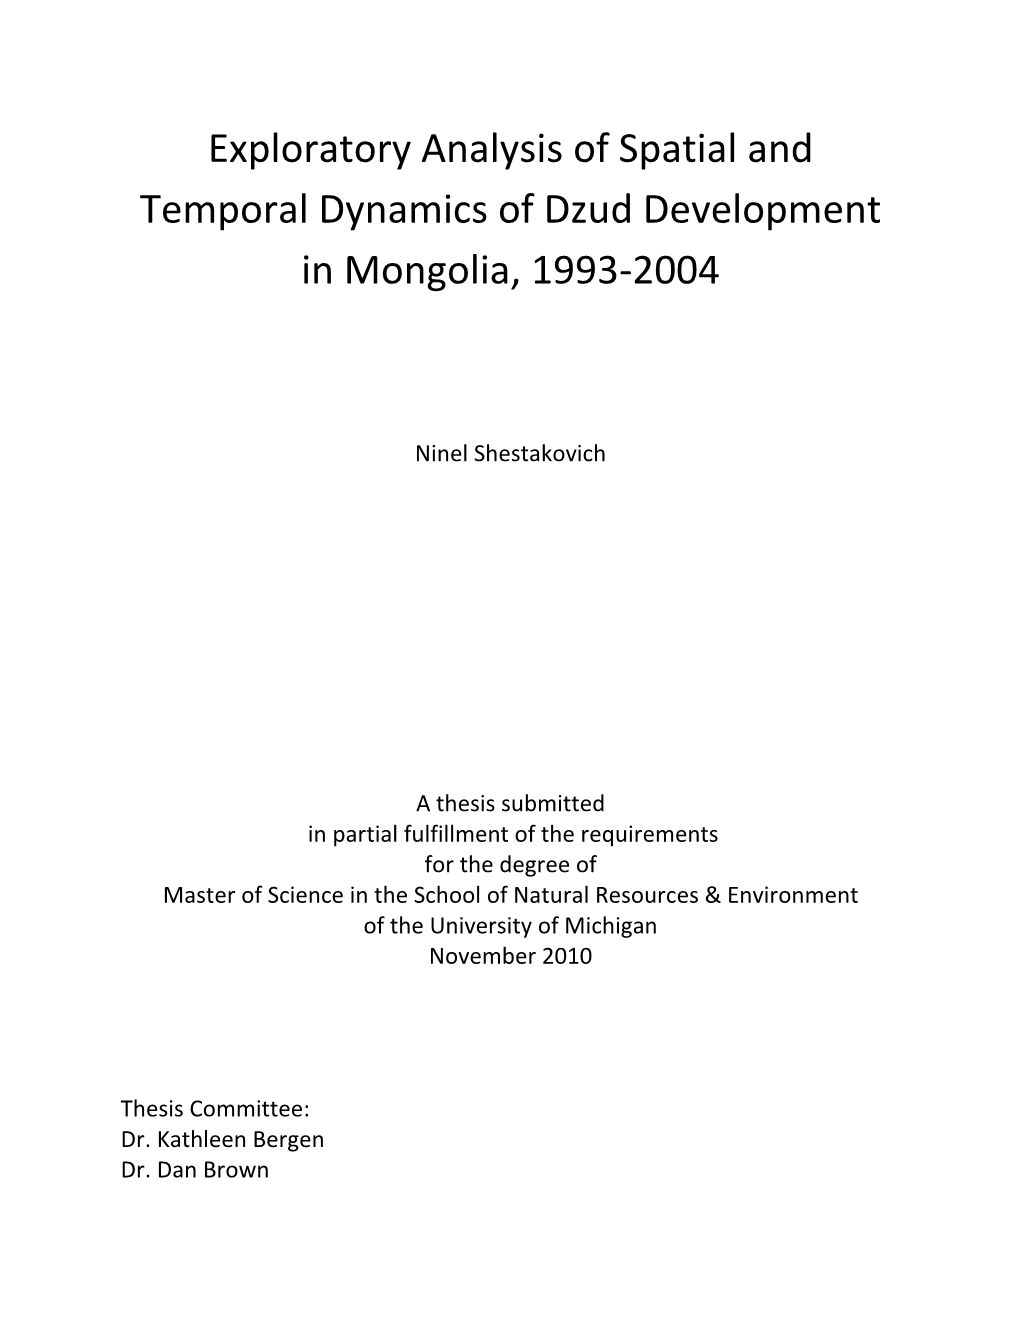 Exploratory Analysis of Spatial and Temporal Dynamics of Dzud Development in Mongolia, 1993-2004